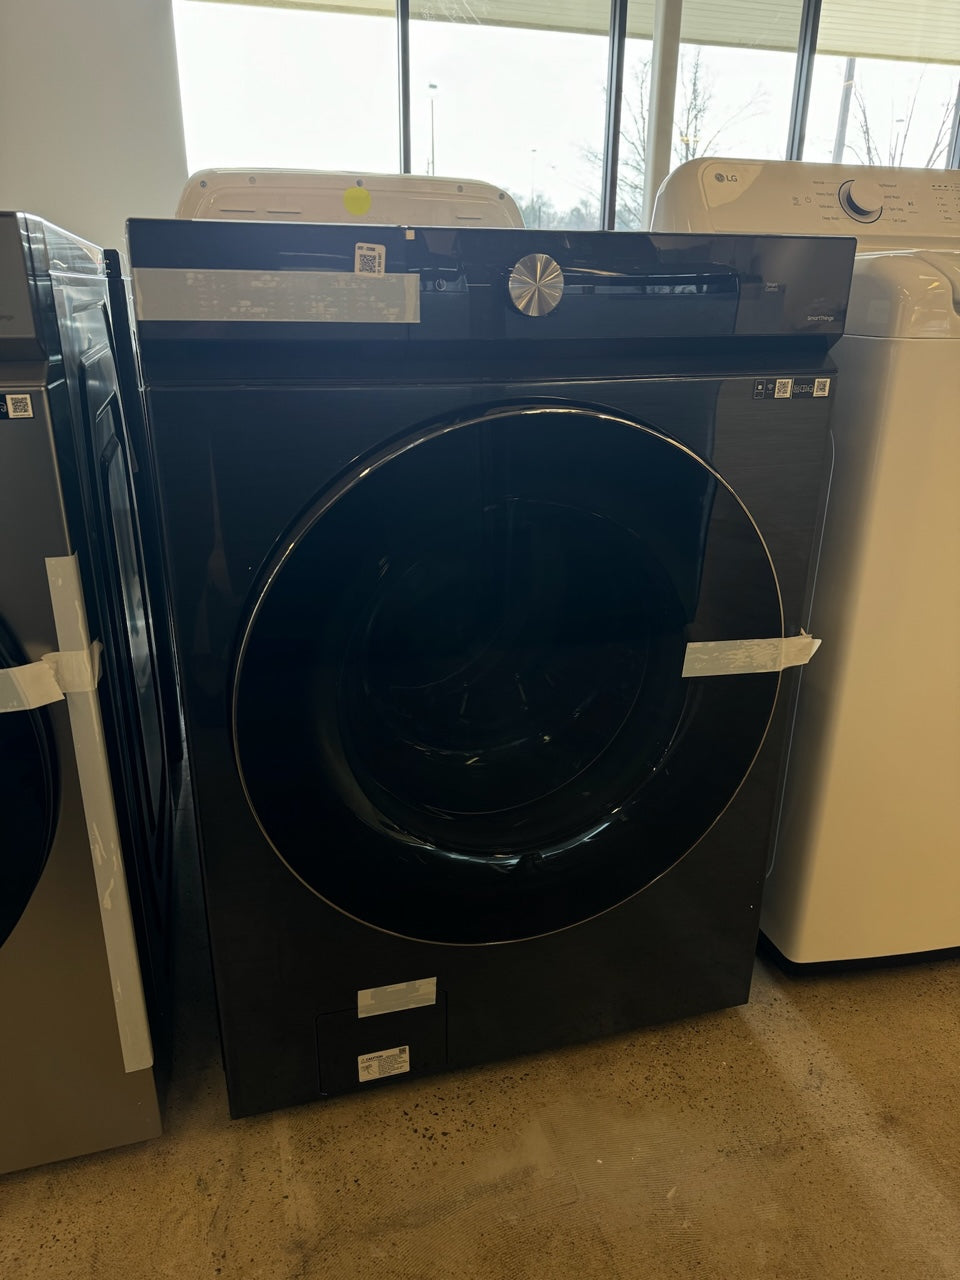 AI QUADWASH CAPABLE SAMSUNG STACKABLE SMART FRONT LOAD WASHER MODEL: WF53BB8900ADUS  WAS10001R